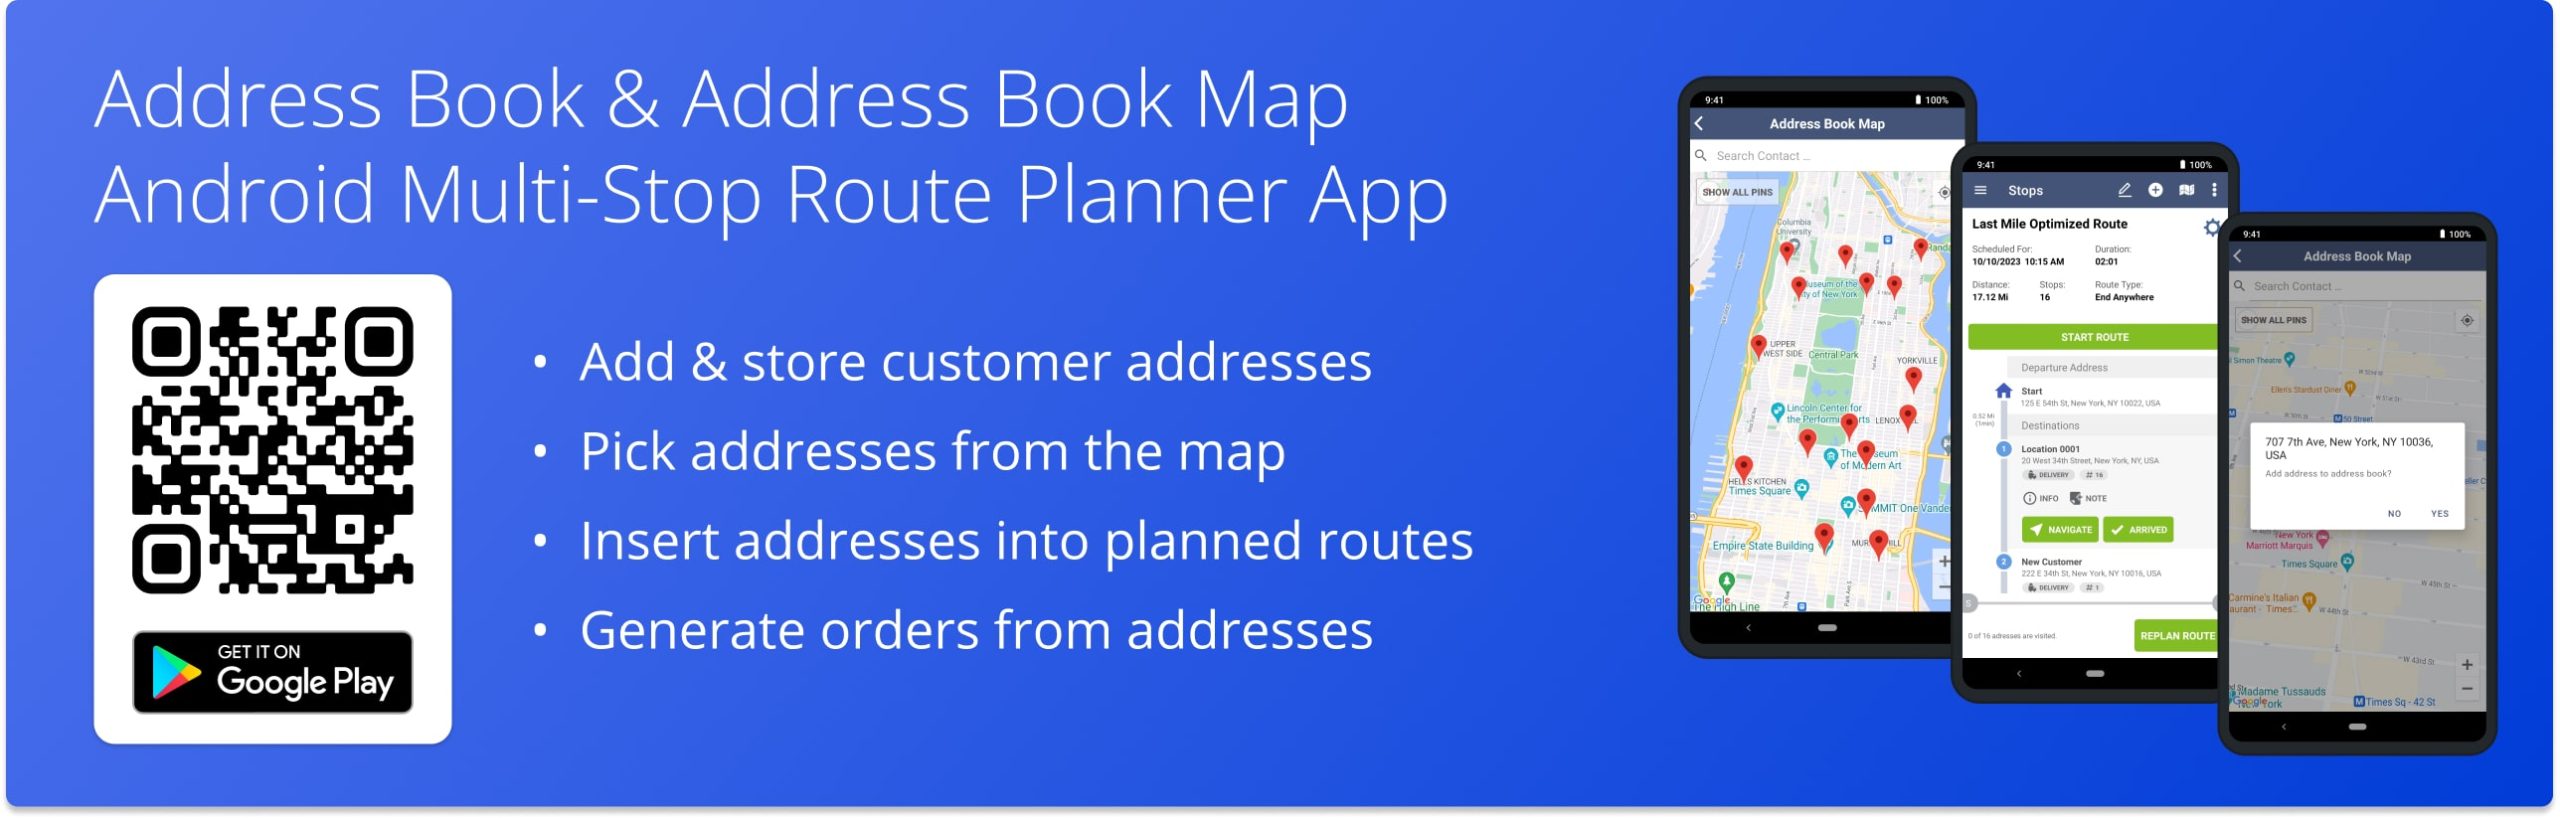 Address Book on the Android Route Planner app for saving addresses, adding addresses from the map, and inserting addresses into planned routes.